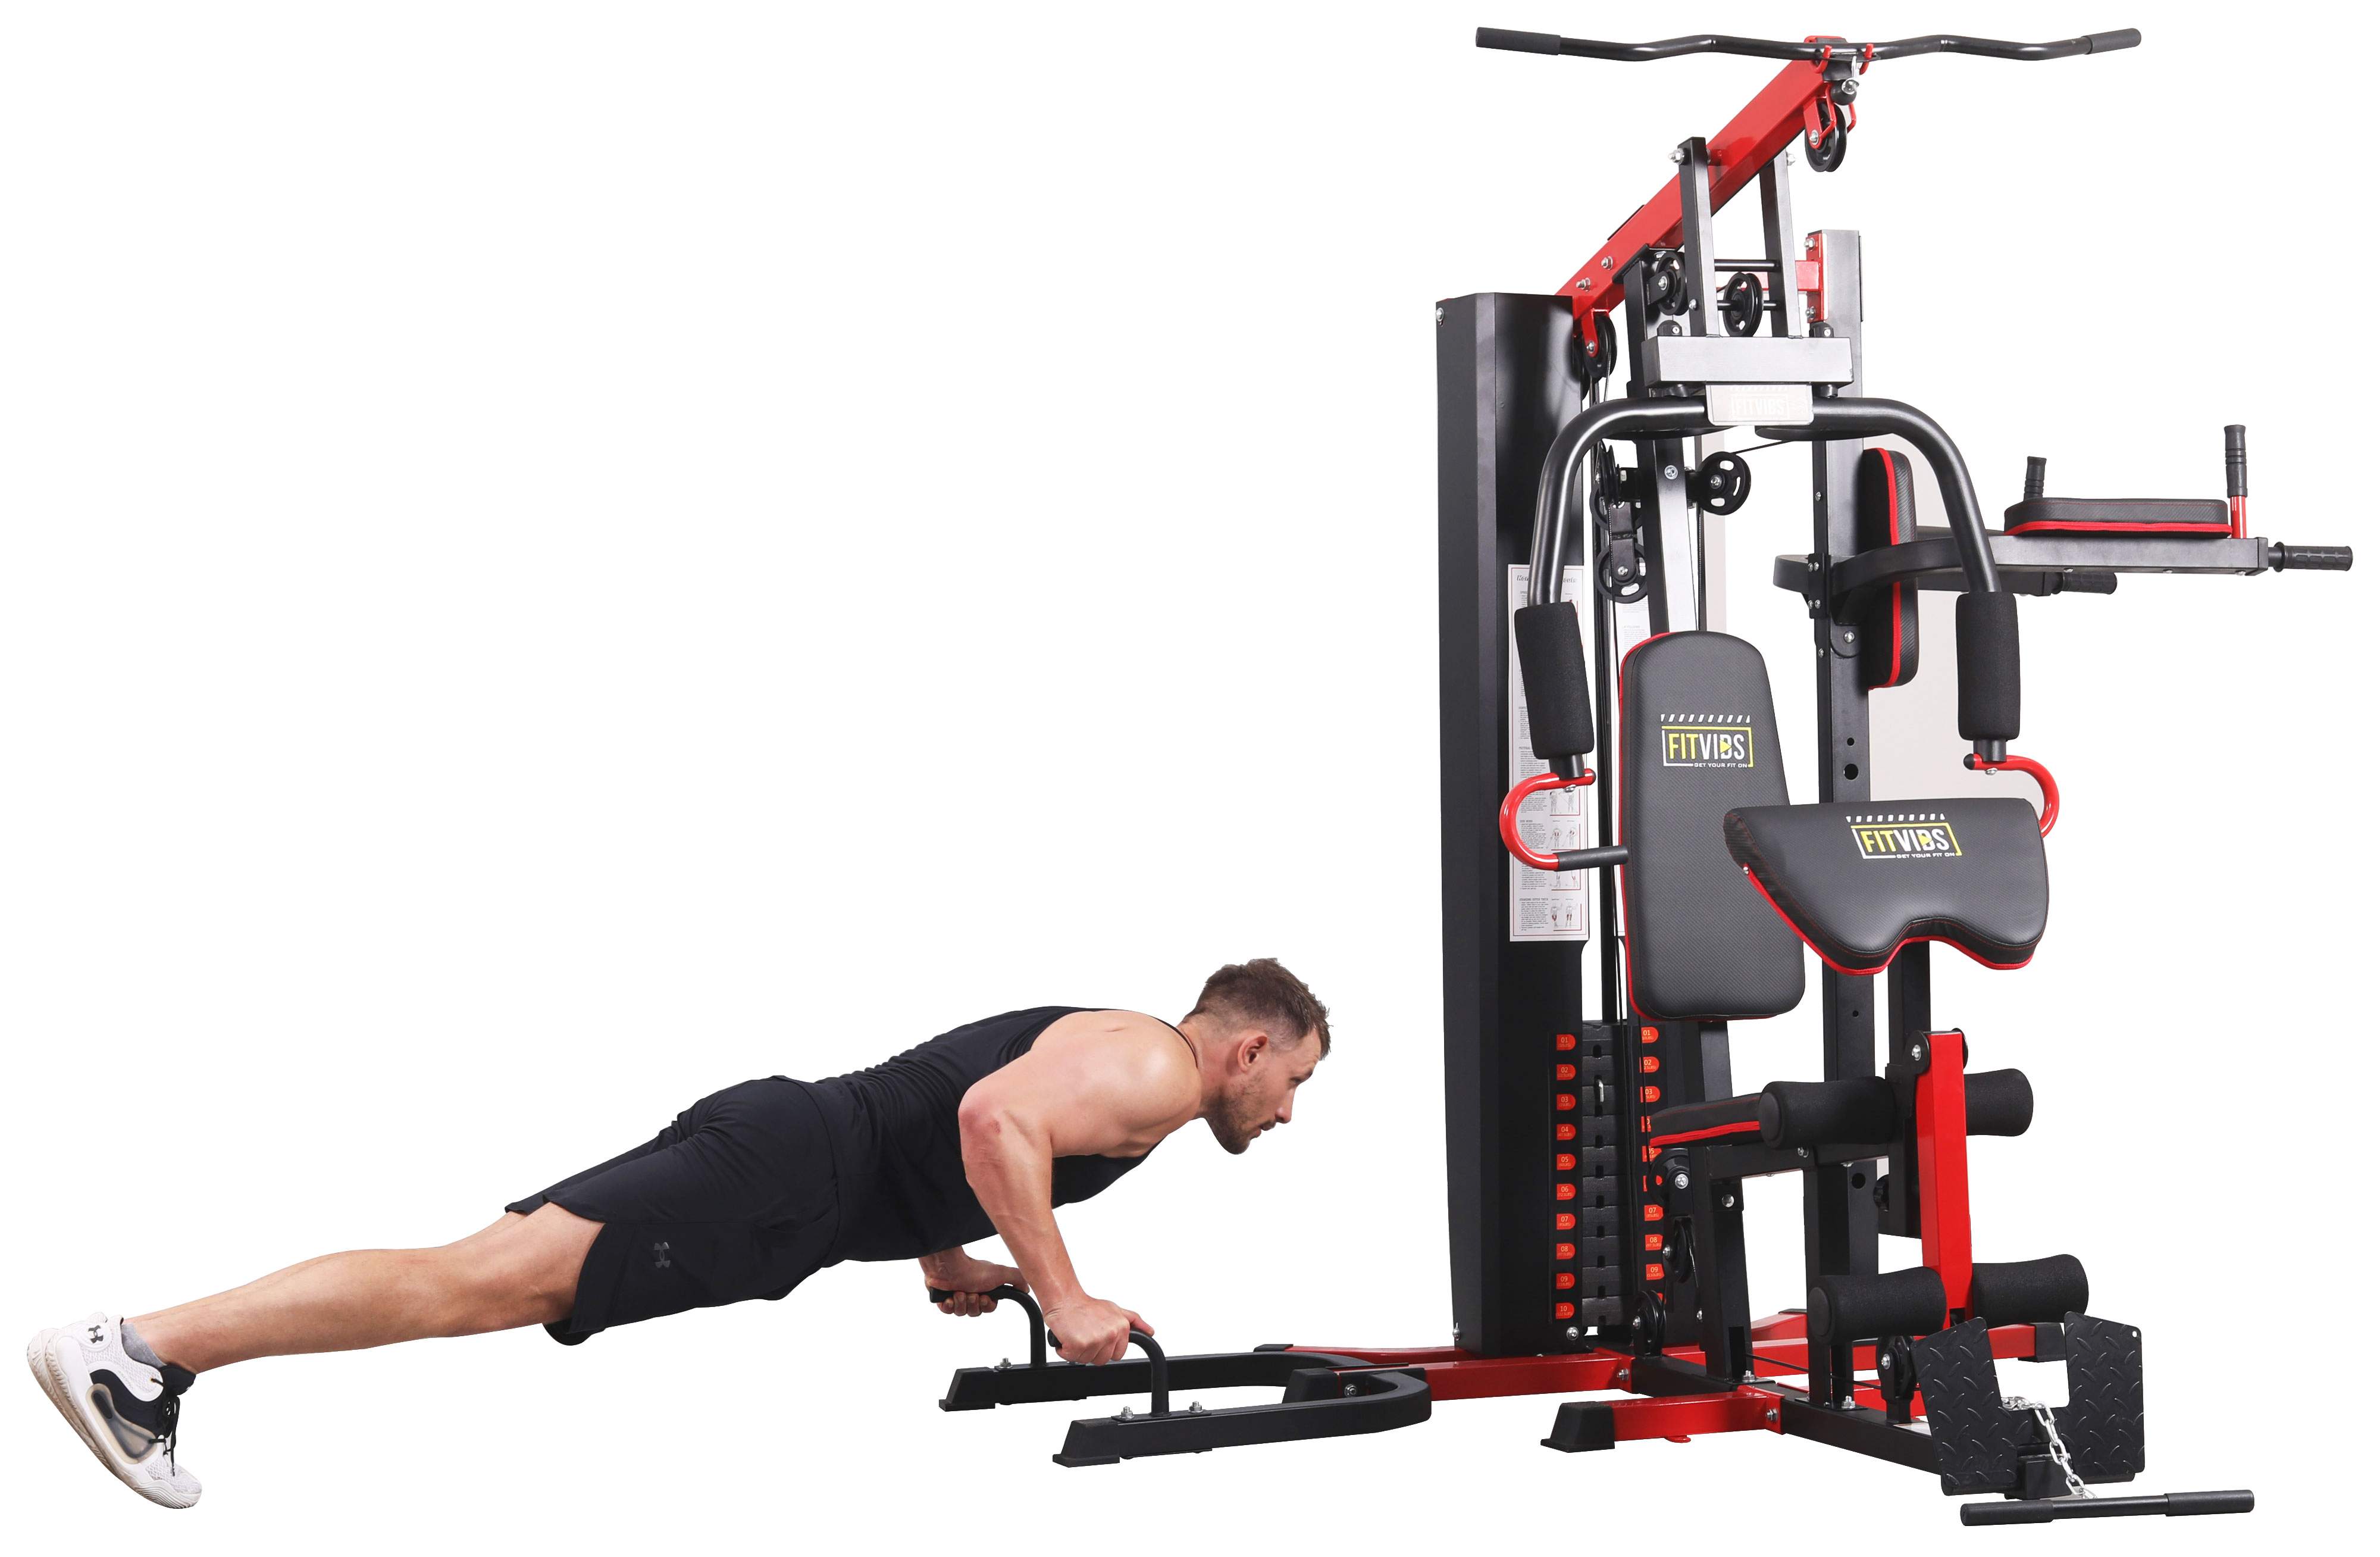 Fitvids LX900 Home Gym System Workout Station with 330 Lbs of Resistance, 122.5 Lbs Weight Stack, Three Station, Comes with Installation Instruction Video, Ships in 7 Boxes - image 4 of 13